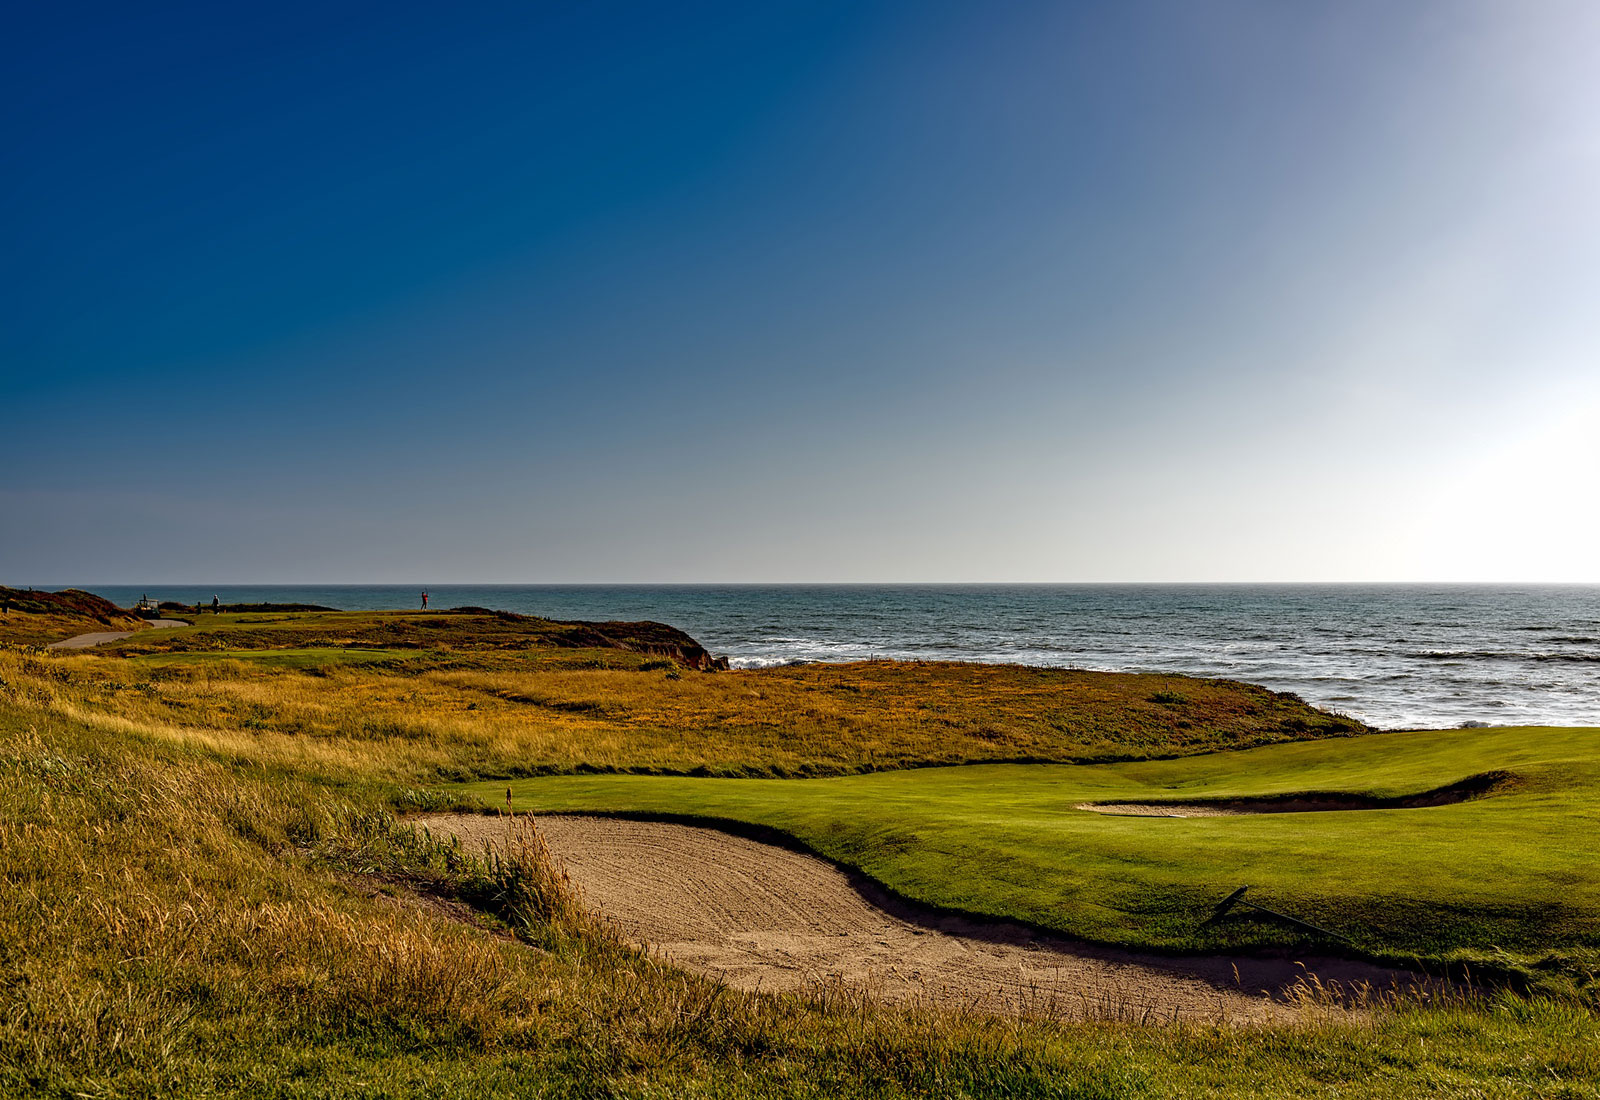 Some locations of the US Open will have dramatic ocean views